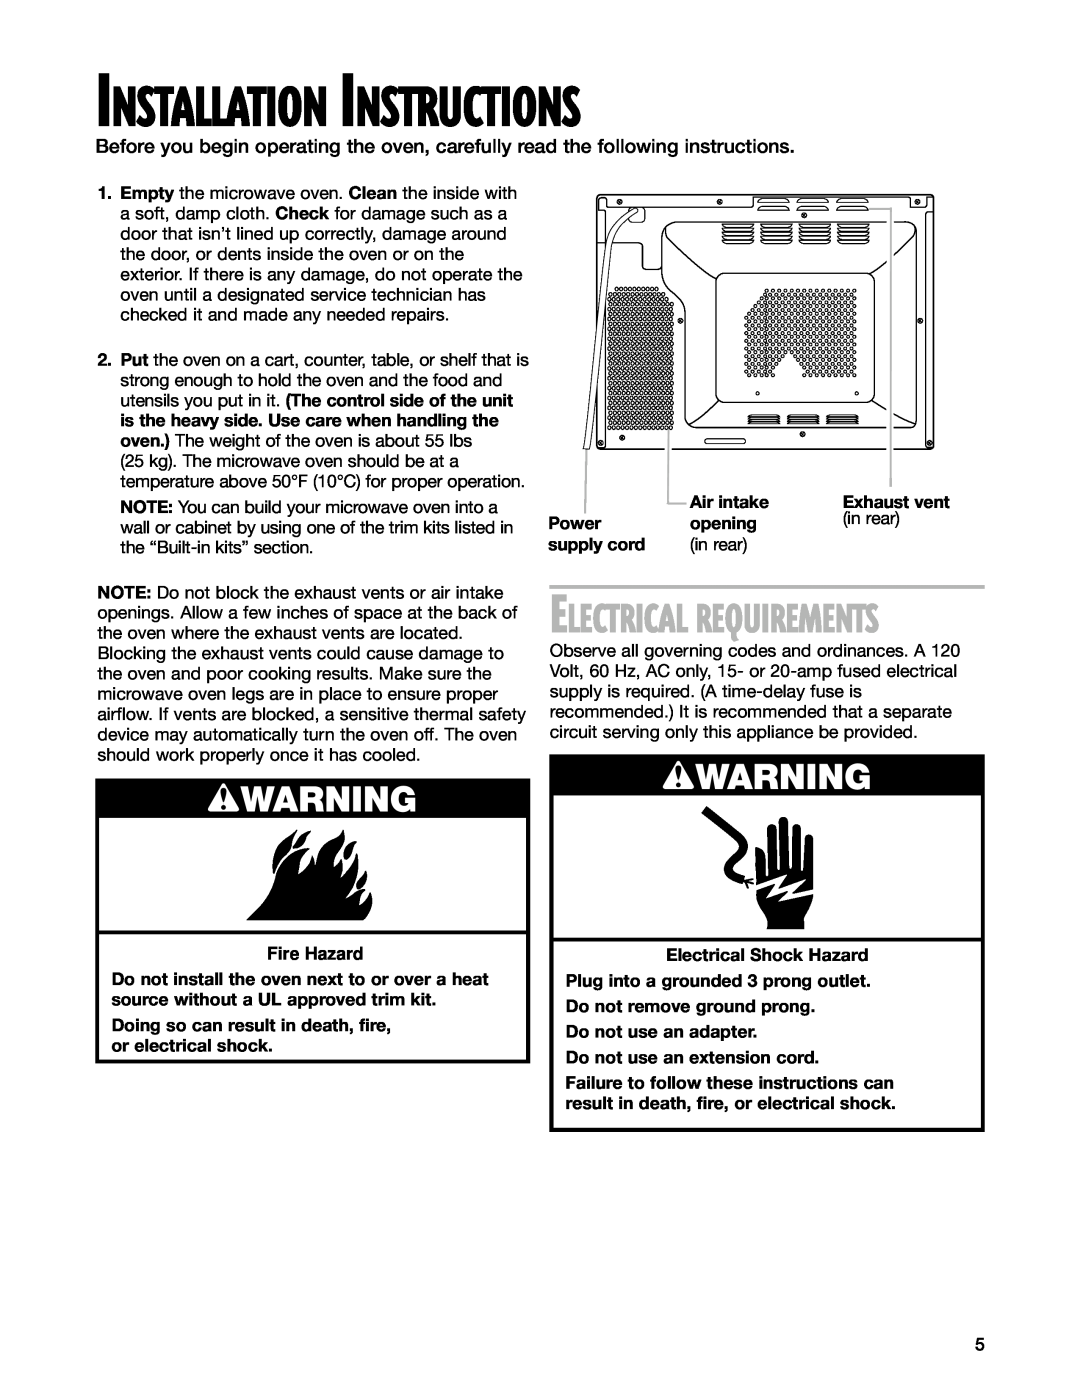 Whirlpool GM8155XJ installation instructions wWARNING, Electrical Requirements, Installation Instructions 